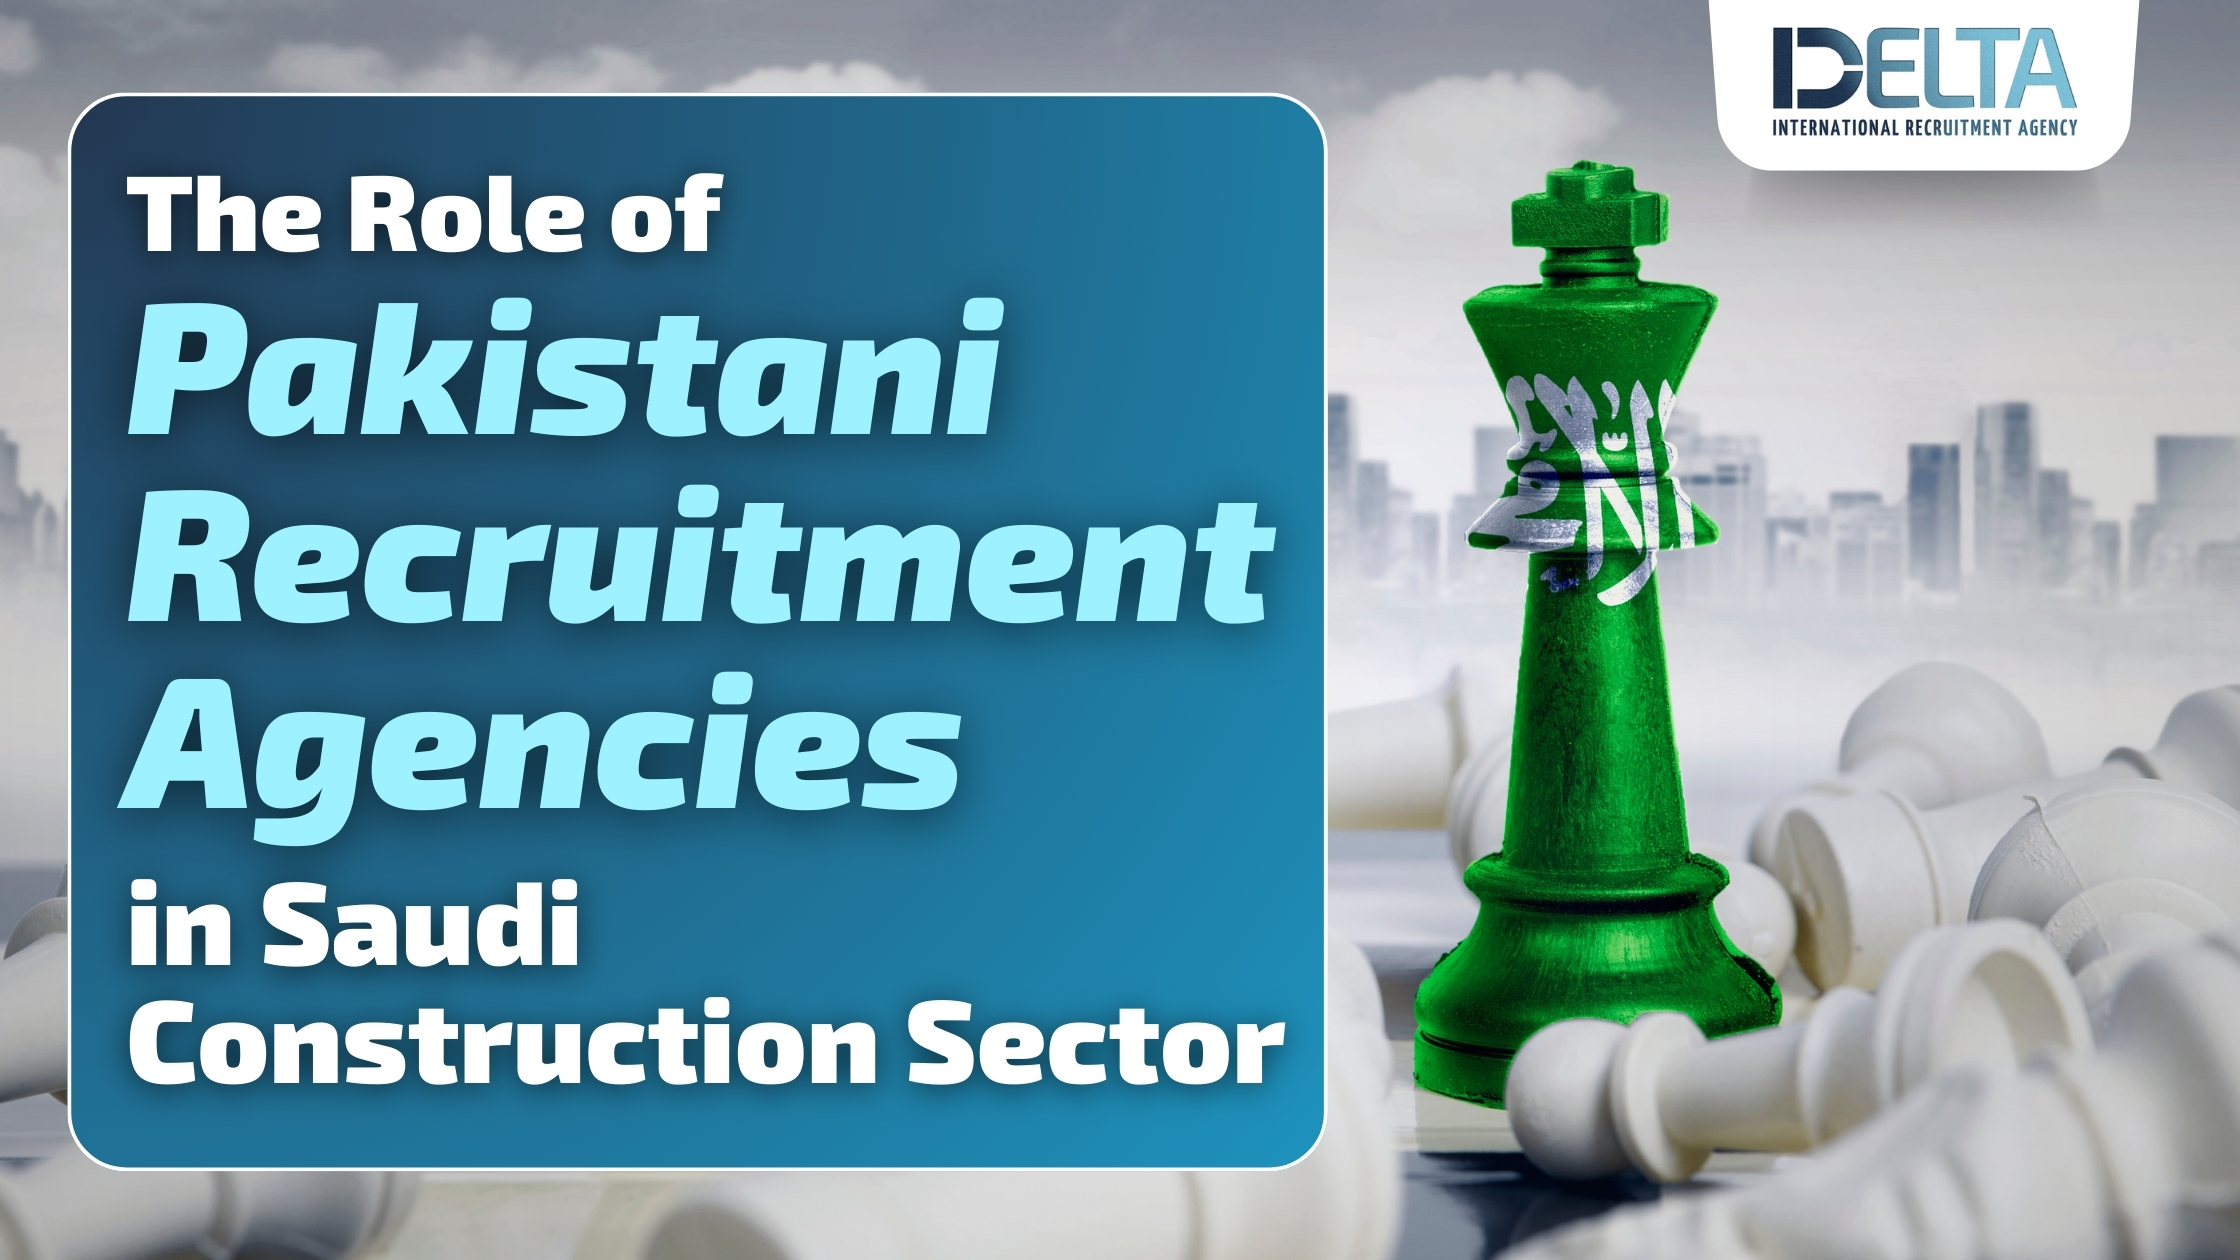 The Role of Pakistani Recruitment Agencies in Saudi Construction Sector